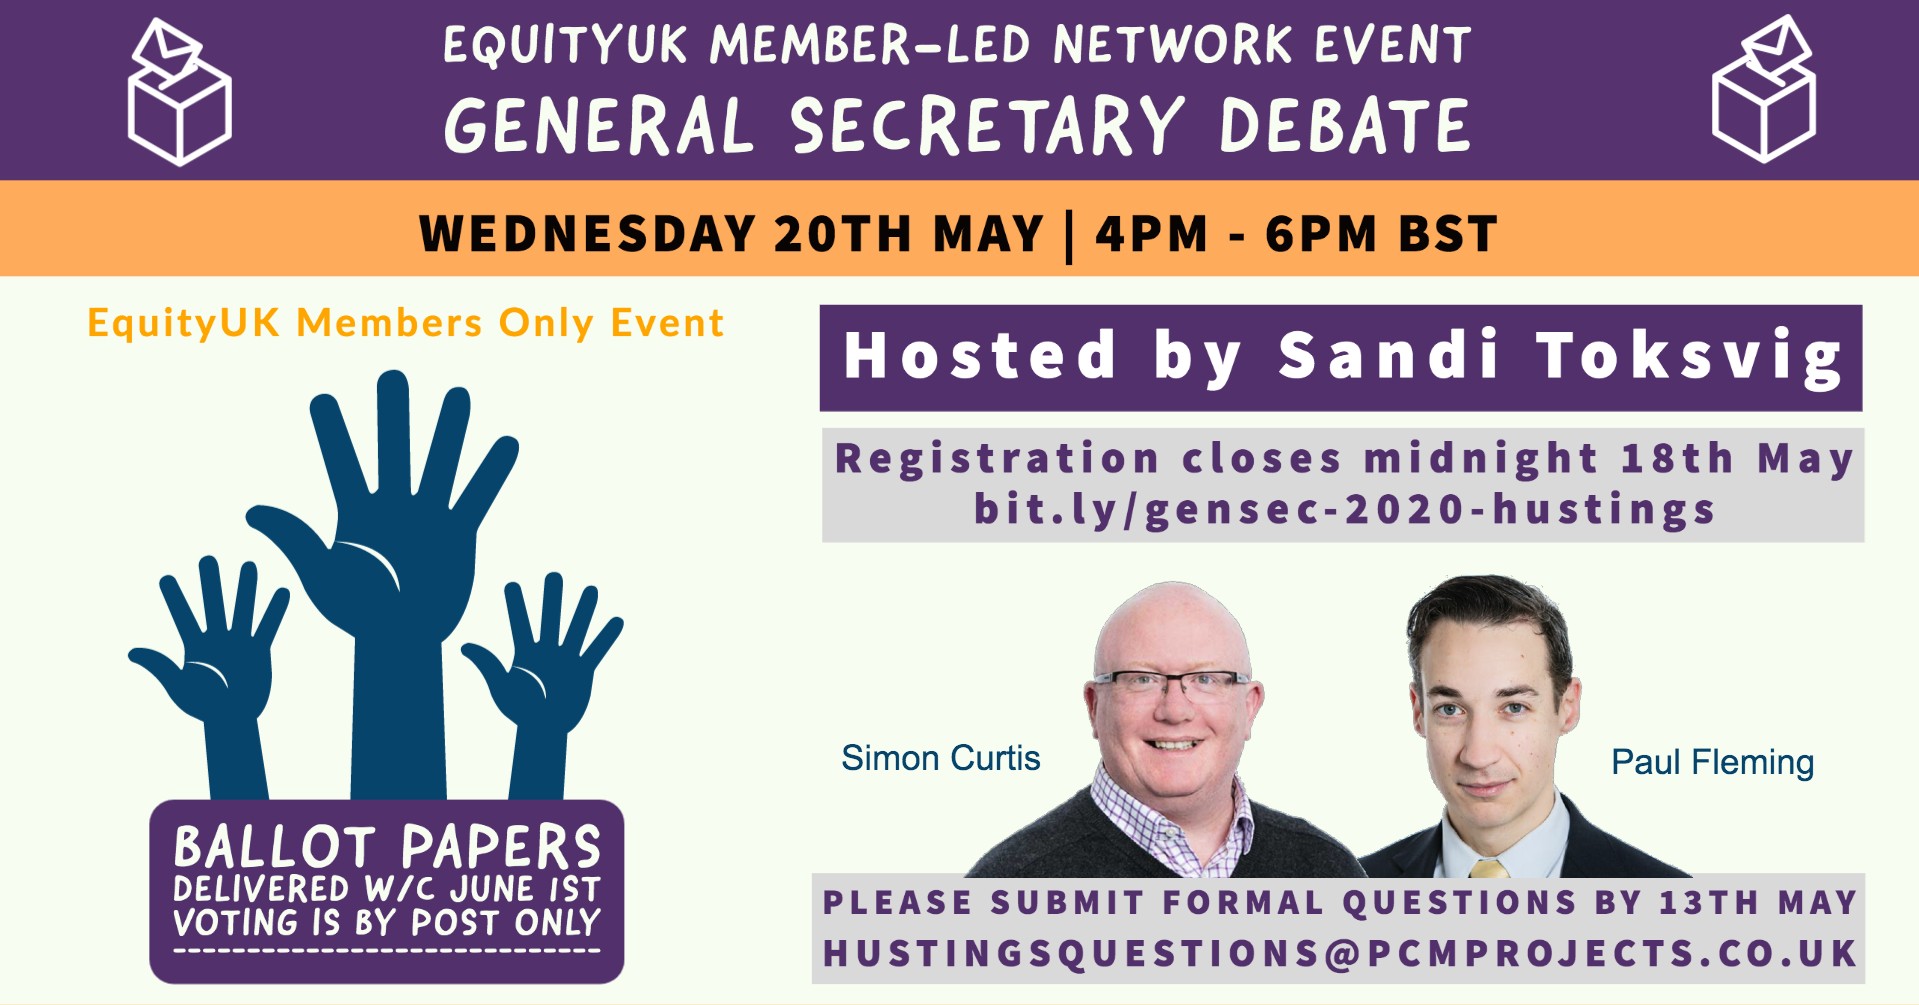 Live digital hustings for the role of Equity General Secretary, chaired by Sandi Toksvig